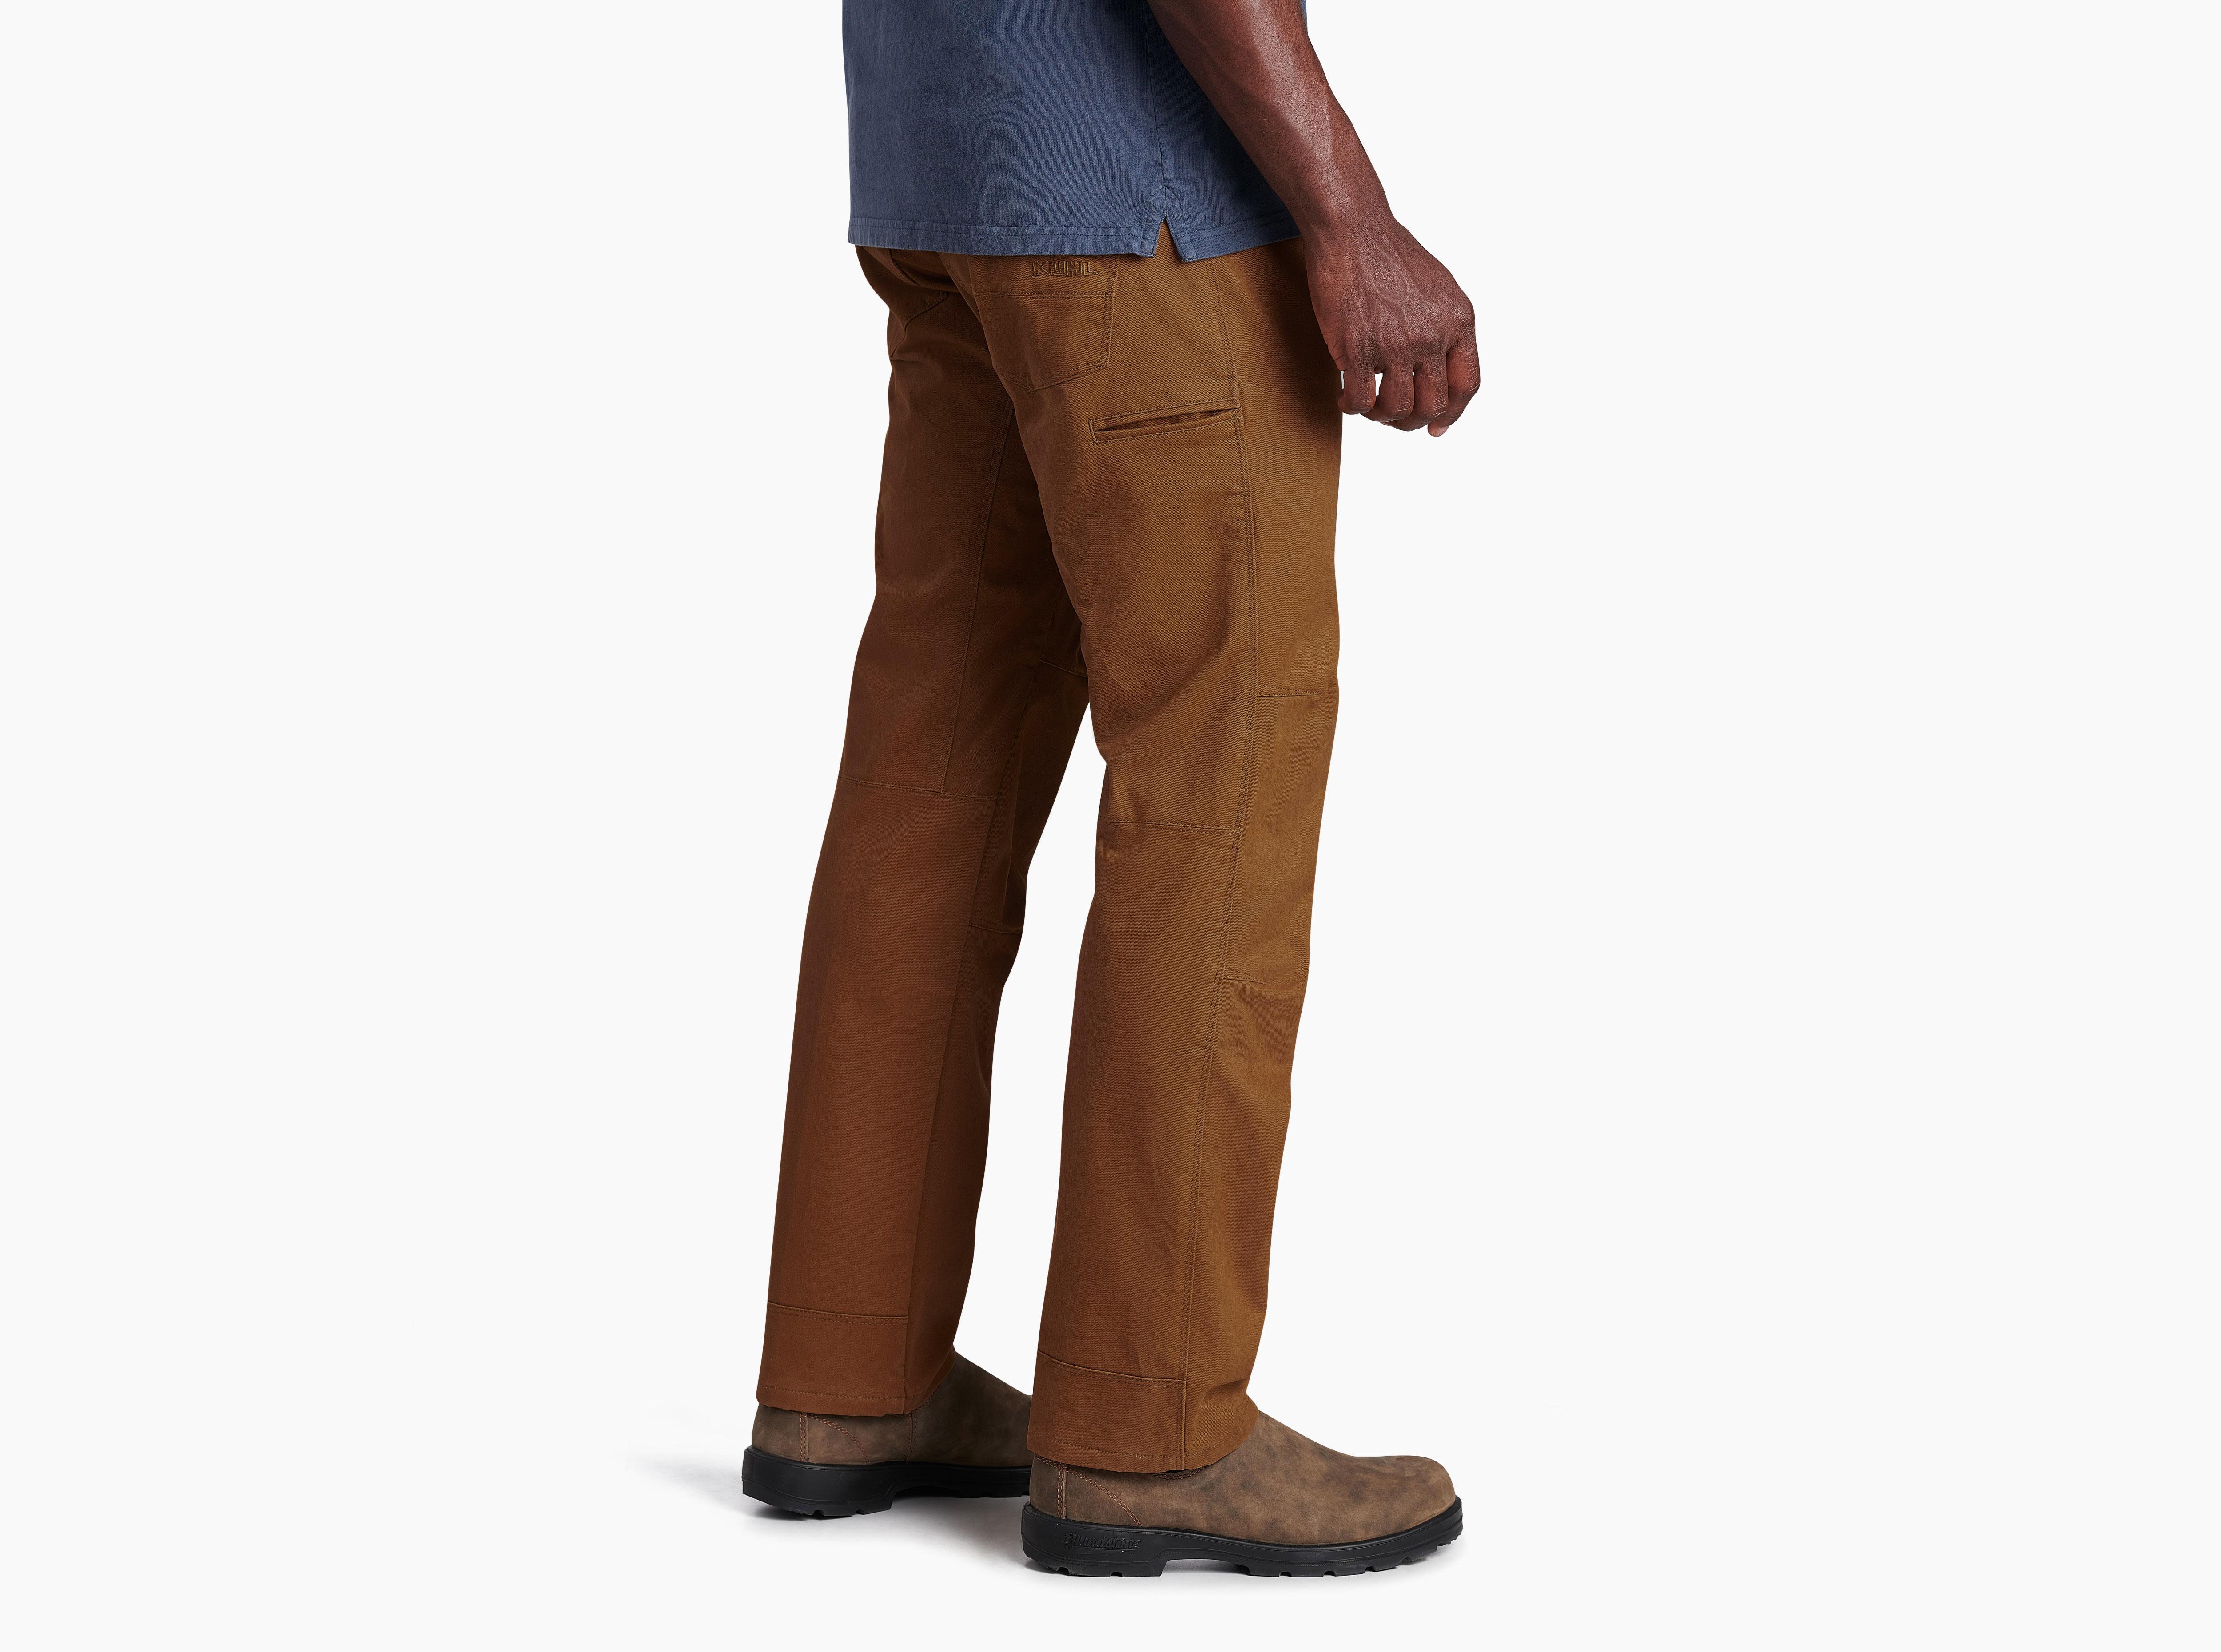 Kuhl Rydr Pants, 34 Inseam - Mens, FREE SHIPPING in Canada